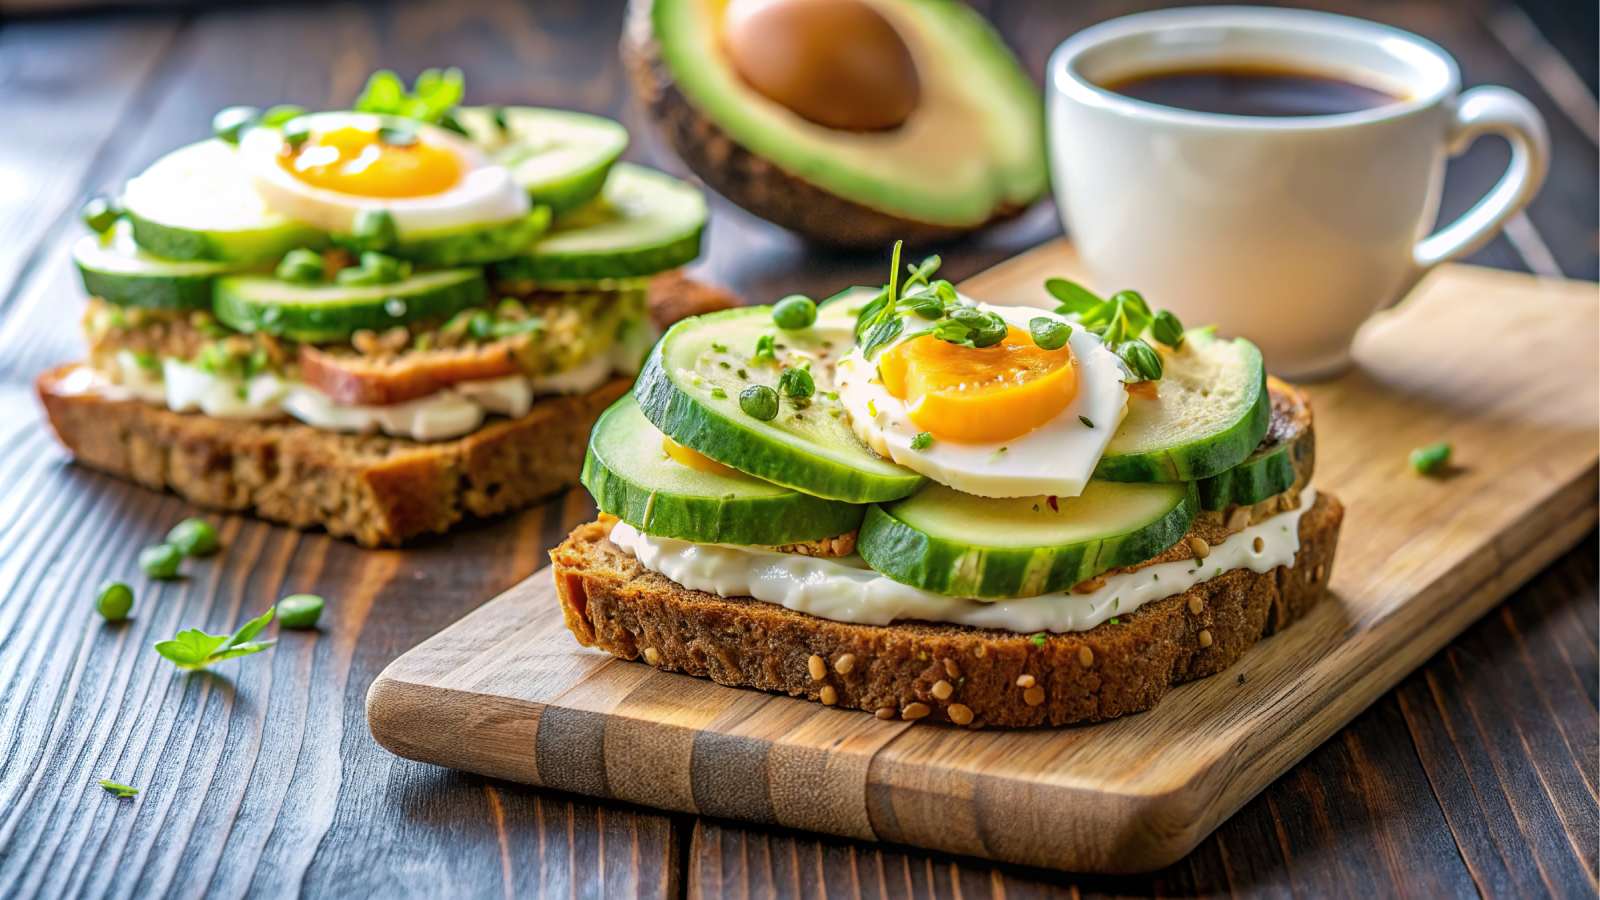 Egg vs Avocado: What is better for weight loss?